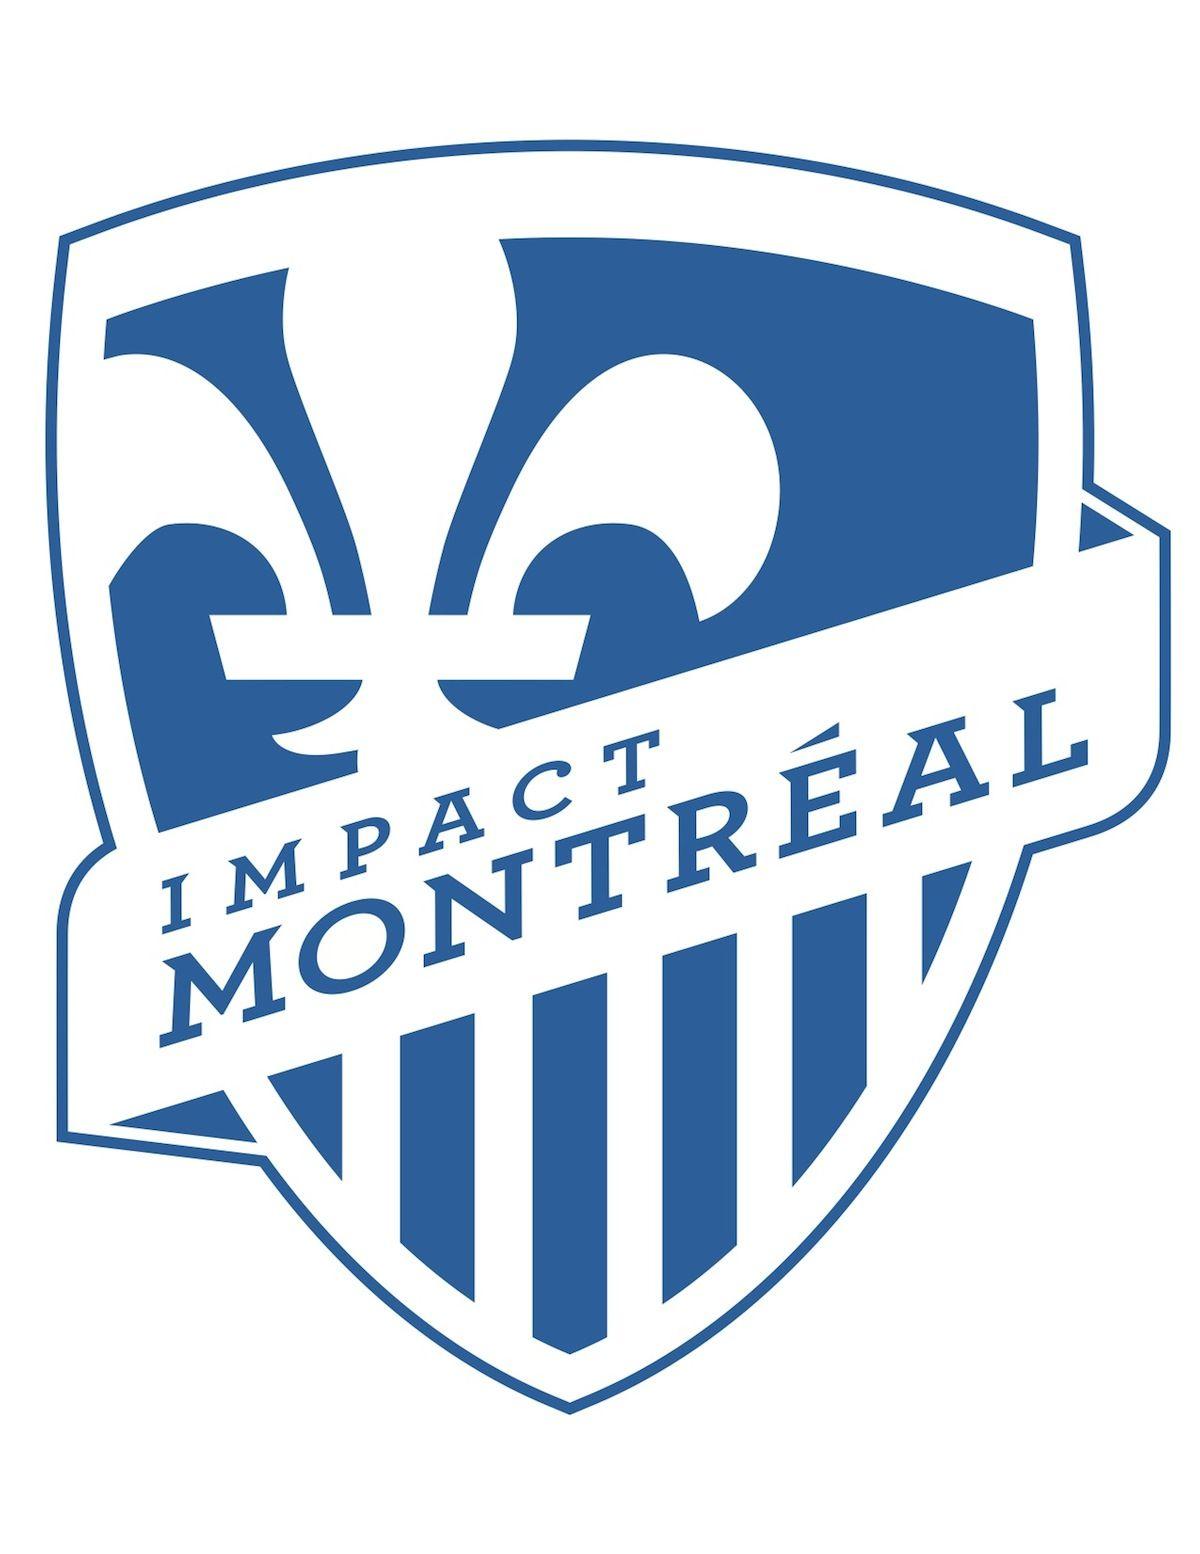 Montreal Impact Logo - Download your Montreal Impact pumpkin carving stencils | Montreal Impact